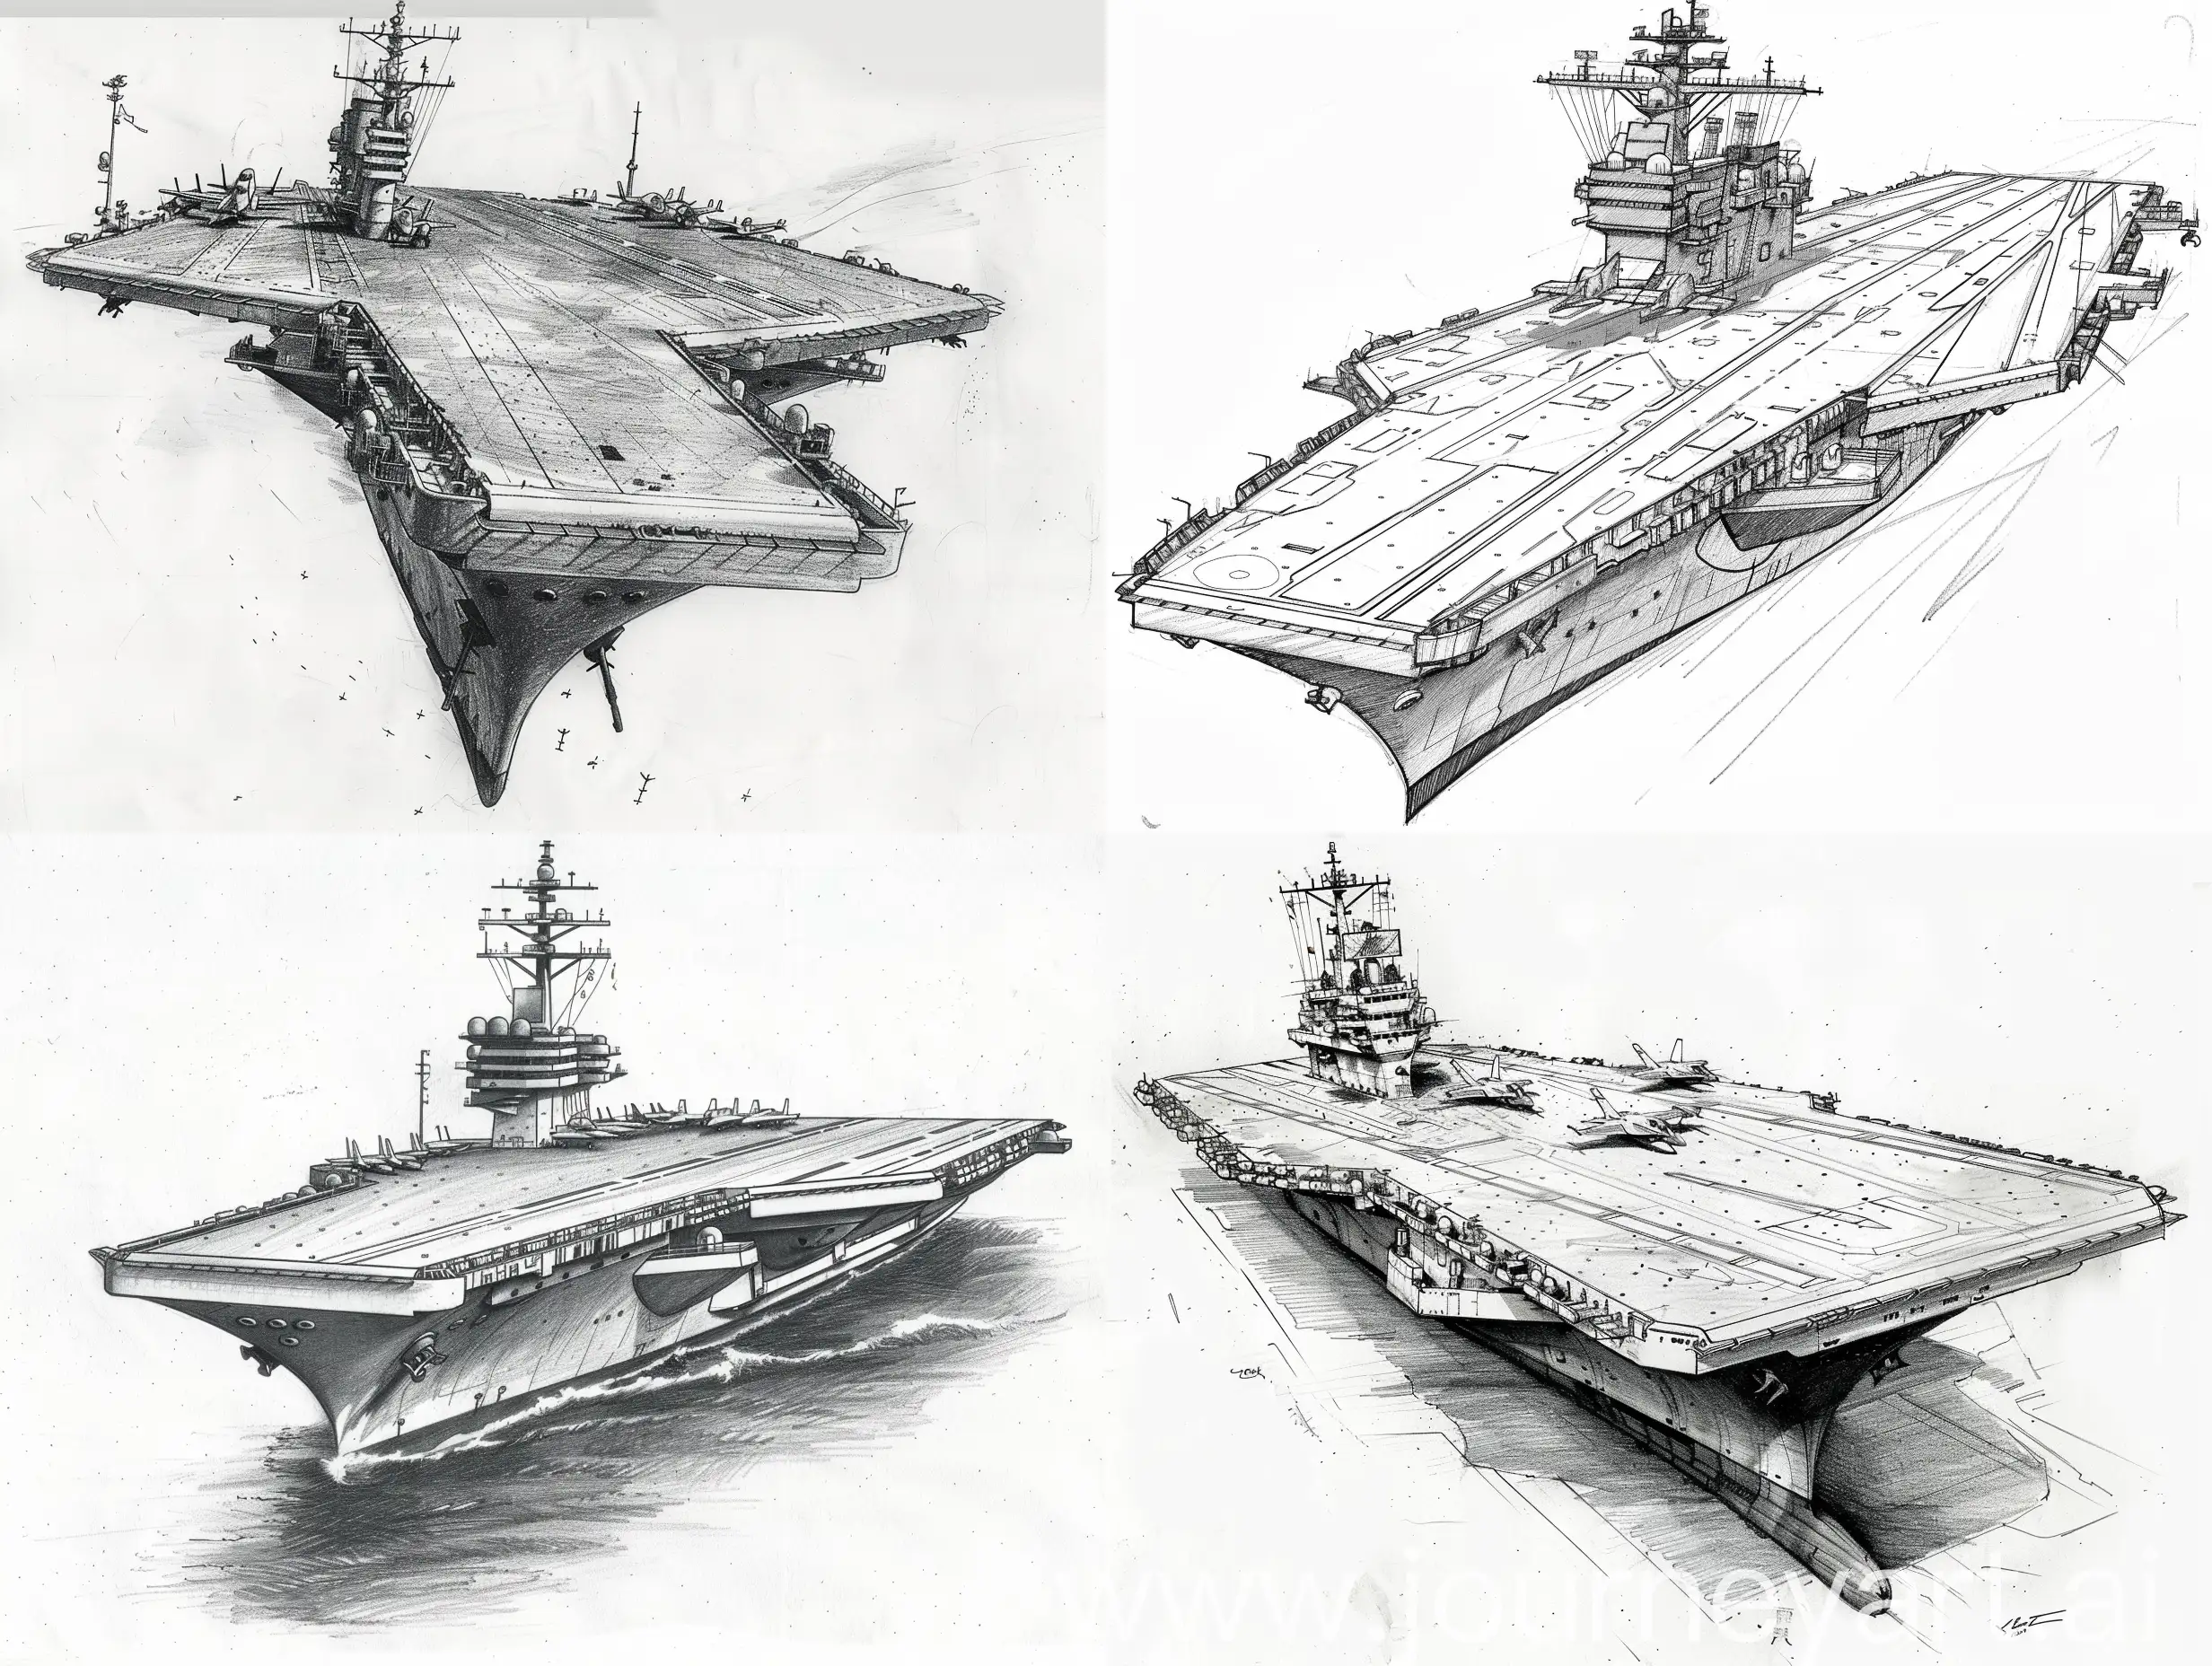 draw a flying aircraft carrier